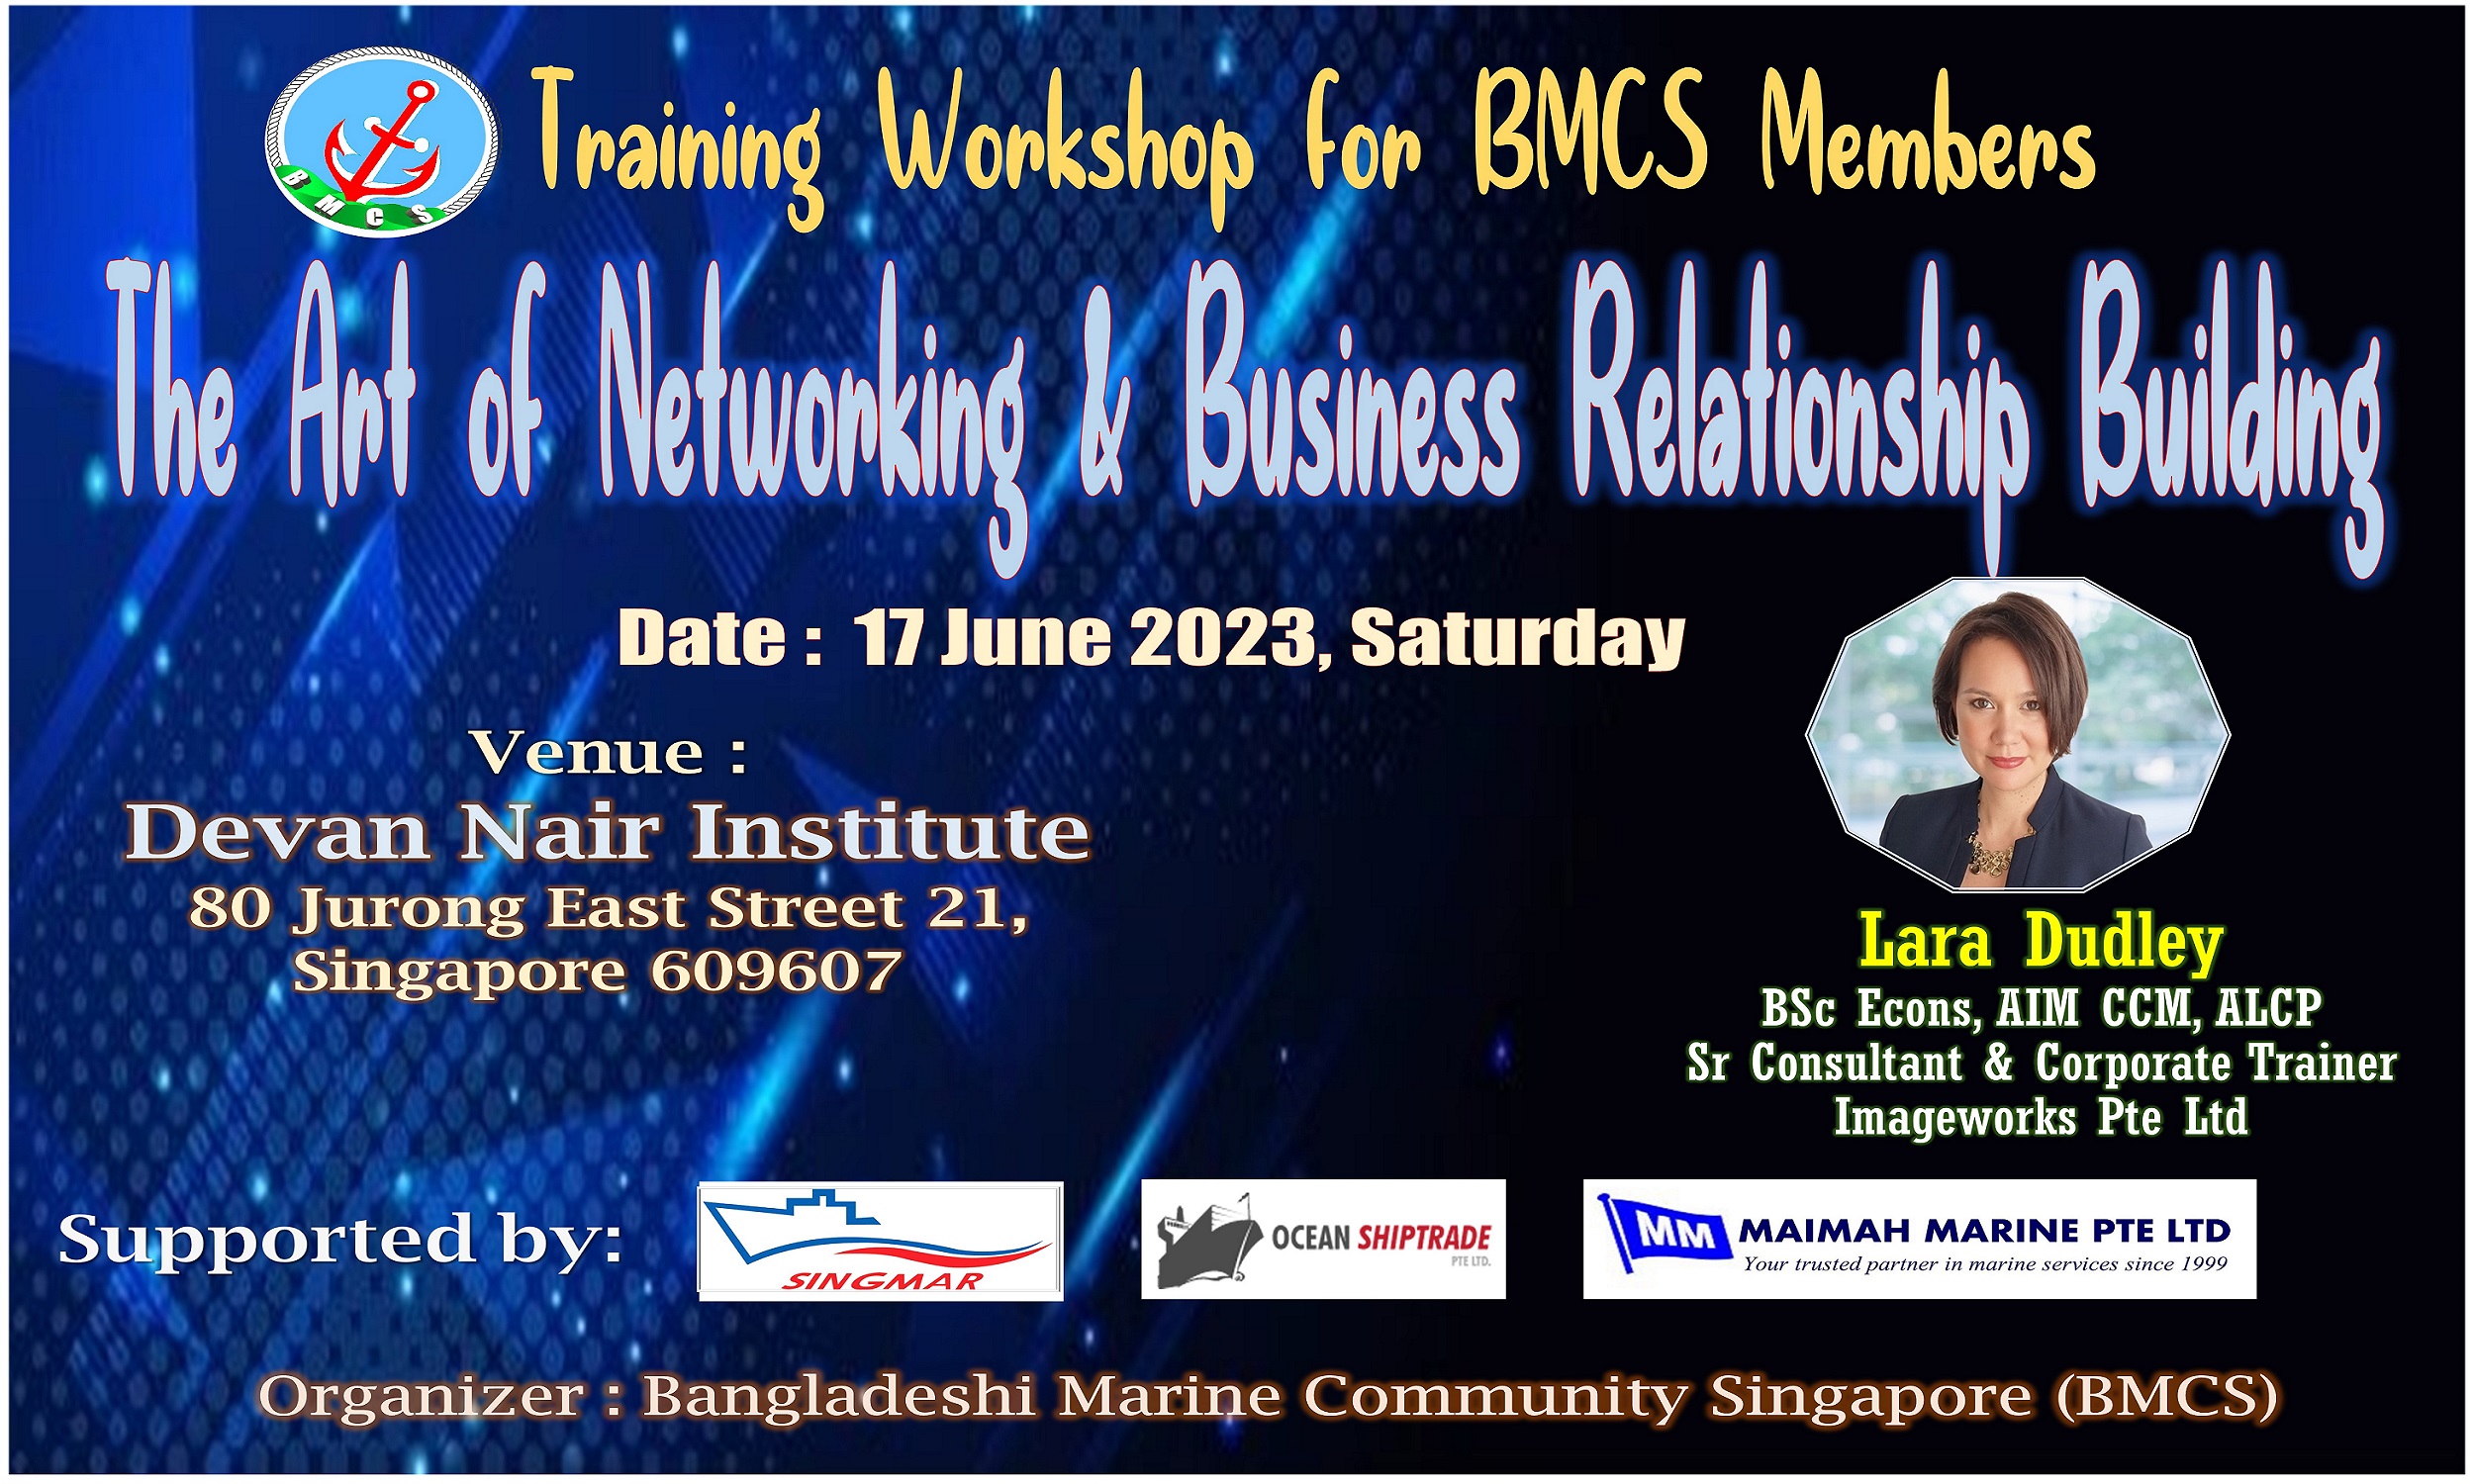 BMCS Workshop on The Art of Networking & Business Relationship Building”